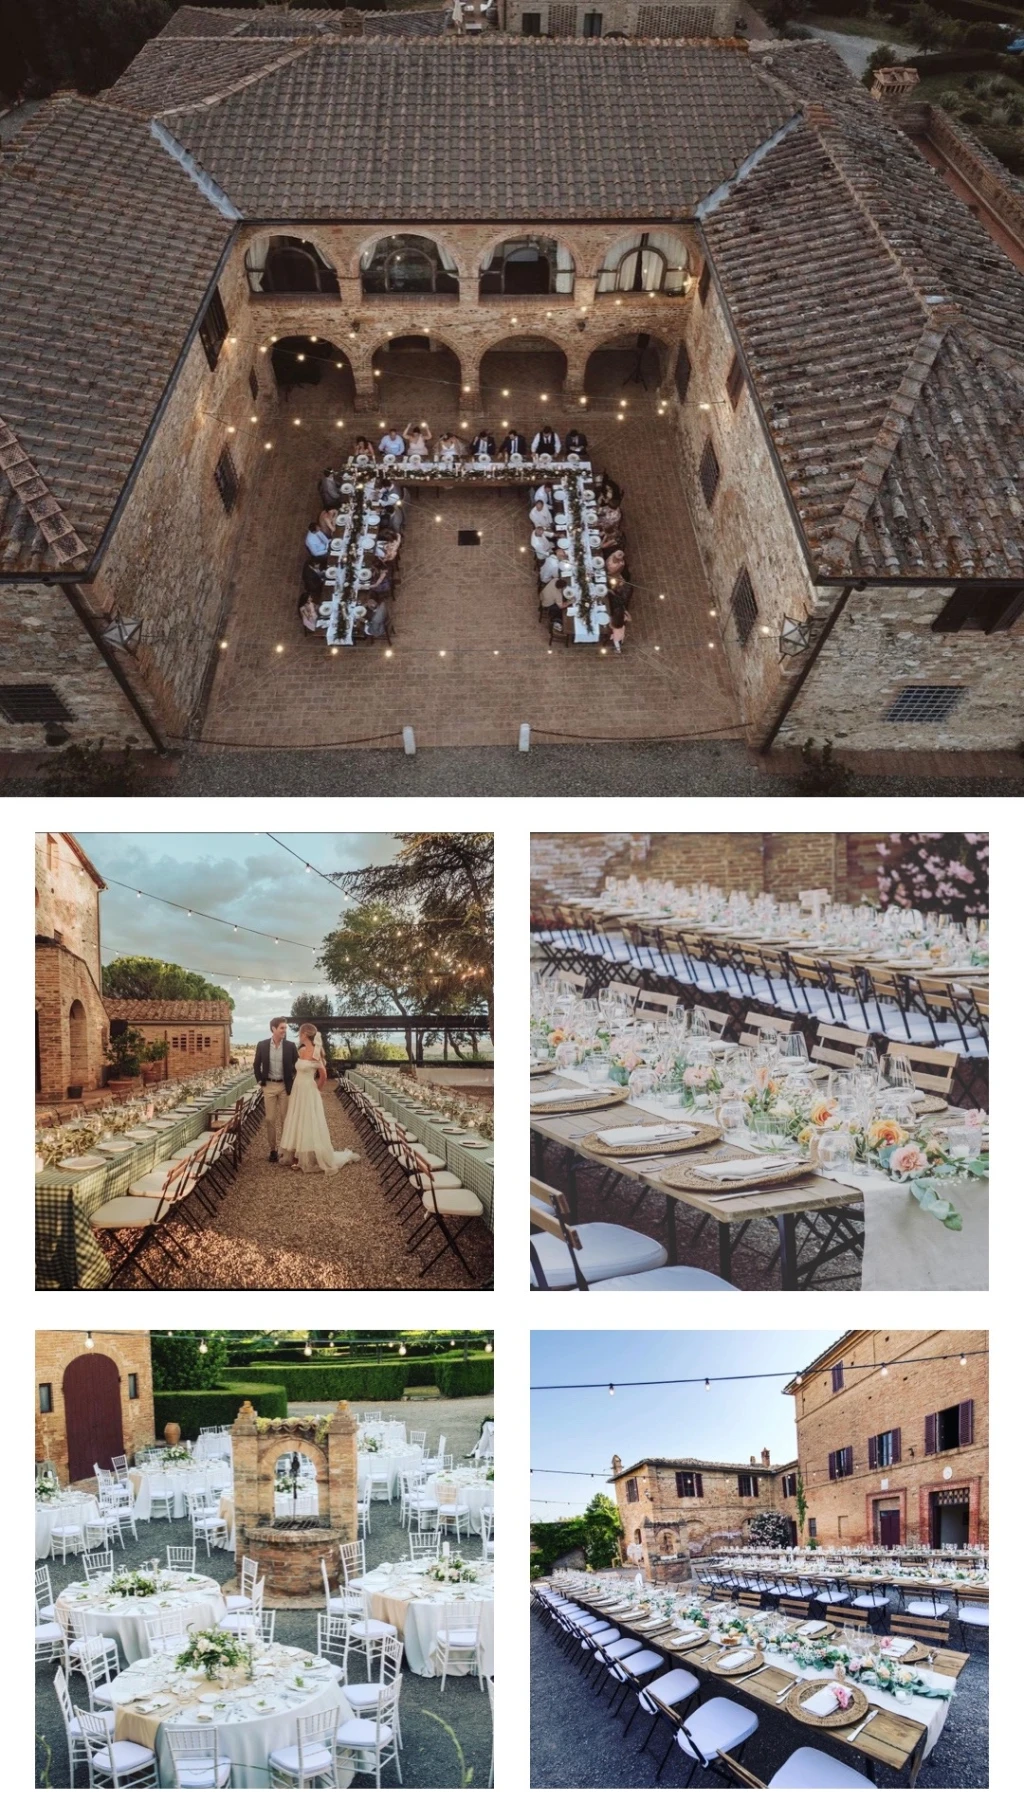 The wedding dinner in the courtyard, the garden, by the pool, in the vineyard or surrounded by olive trees